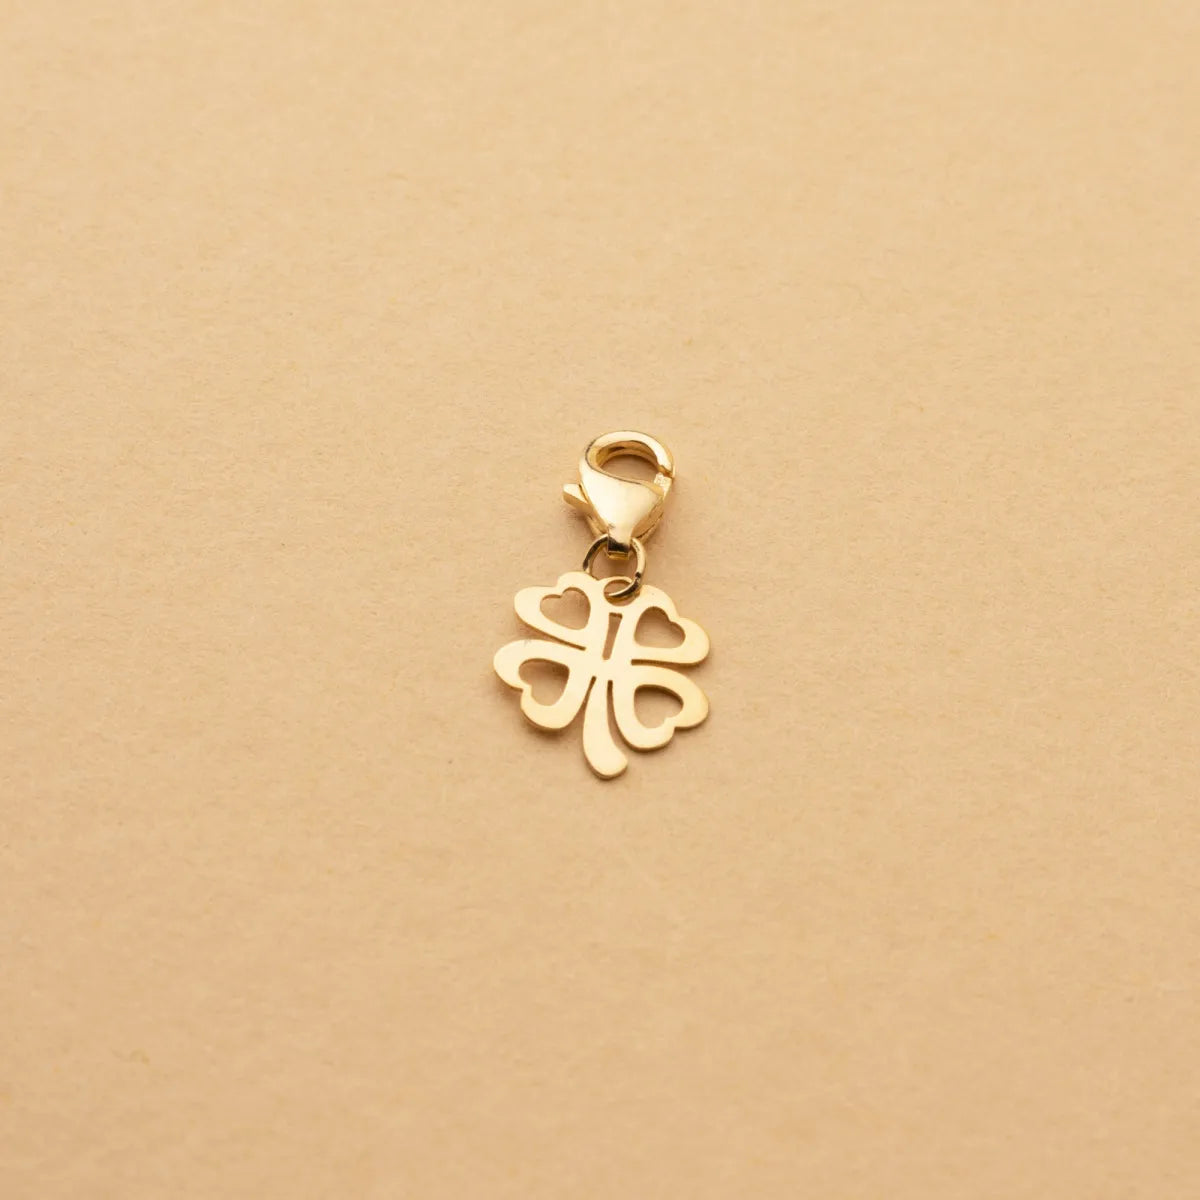 14ct Four-leaf clover pendant charm in yellow gold